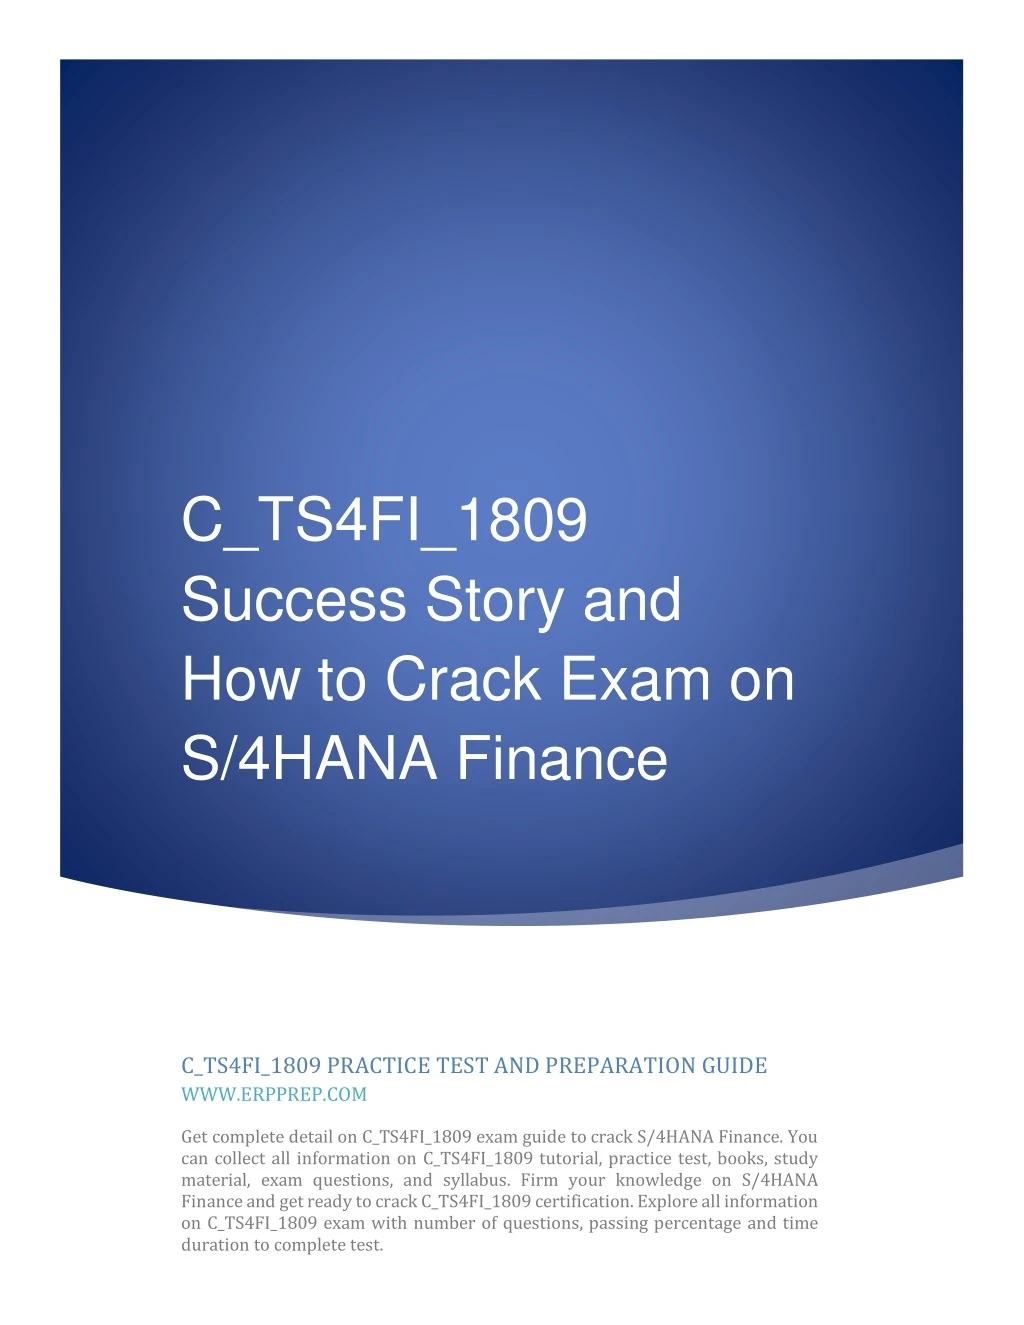 c ts4fi 1809 success story and how to crack exam